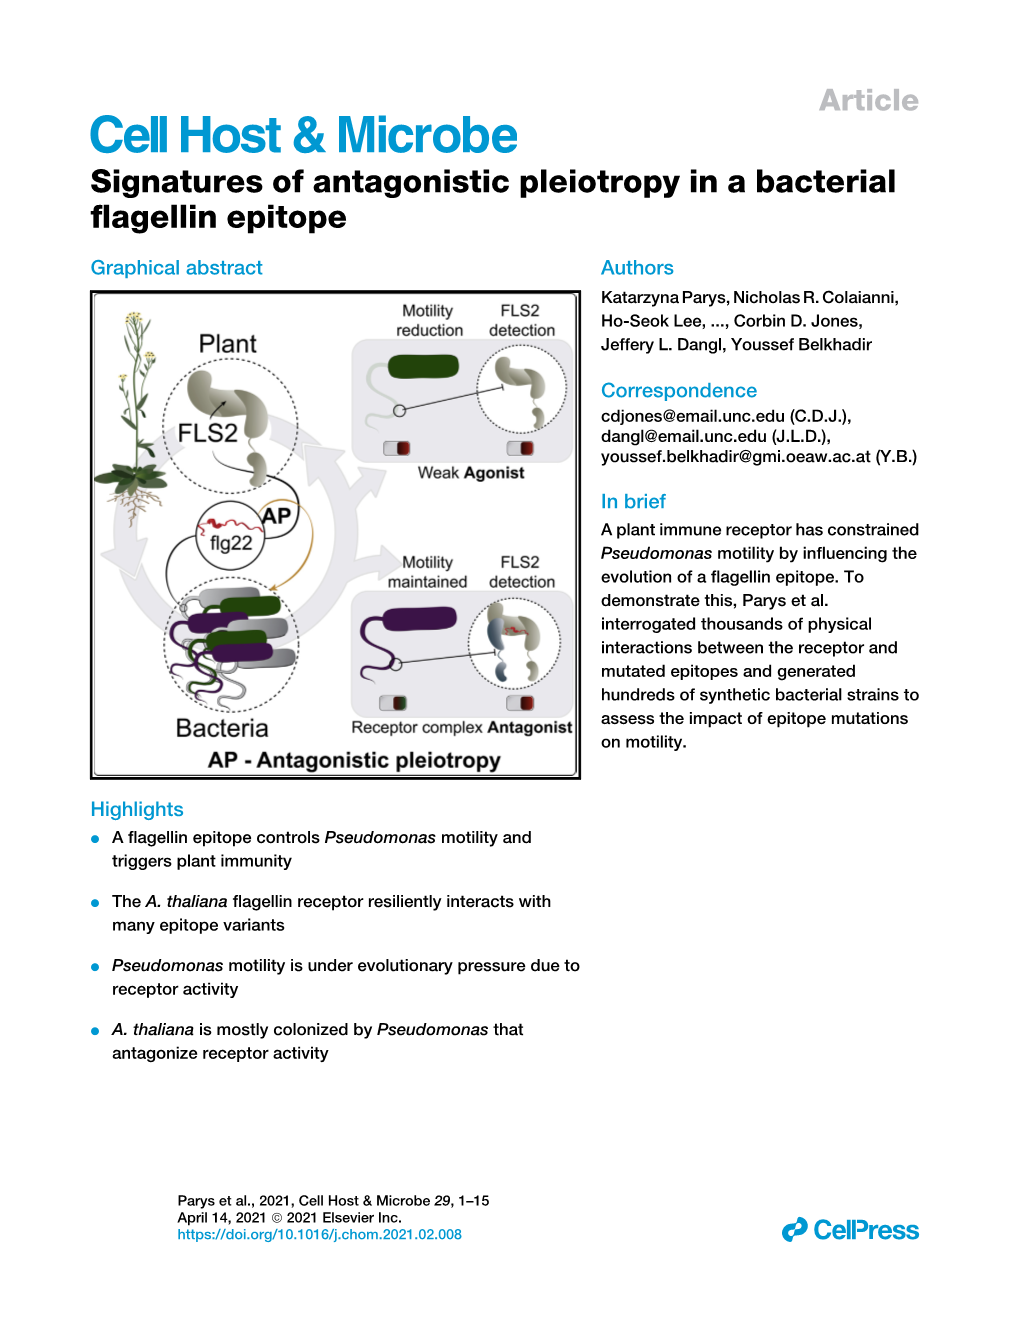 Signatures of Antagonistic Pleiotropy in a Bacterial Flagellin Epitope